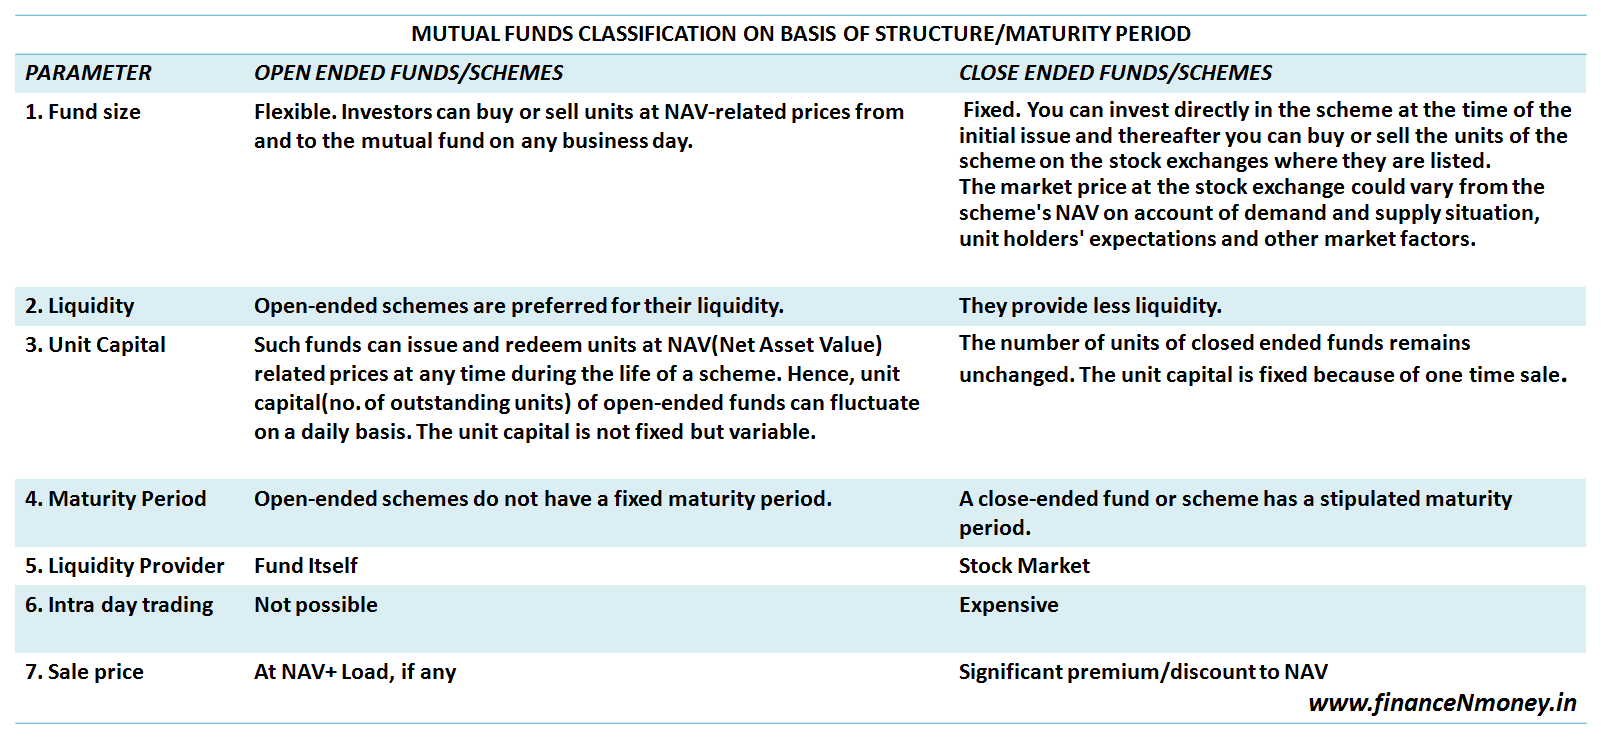 Characteristics and Classes of Funds